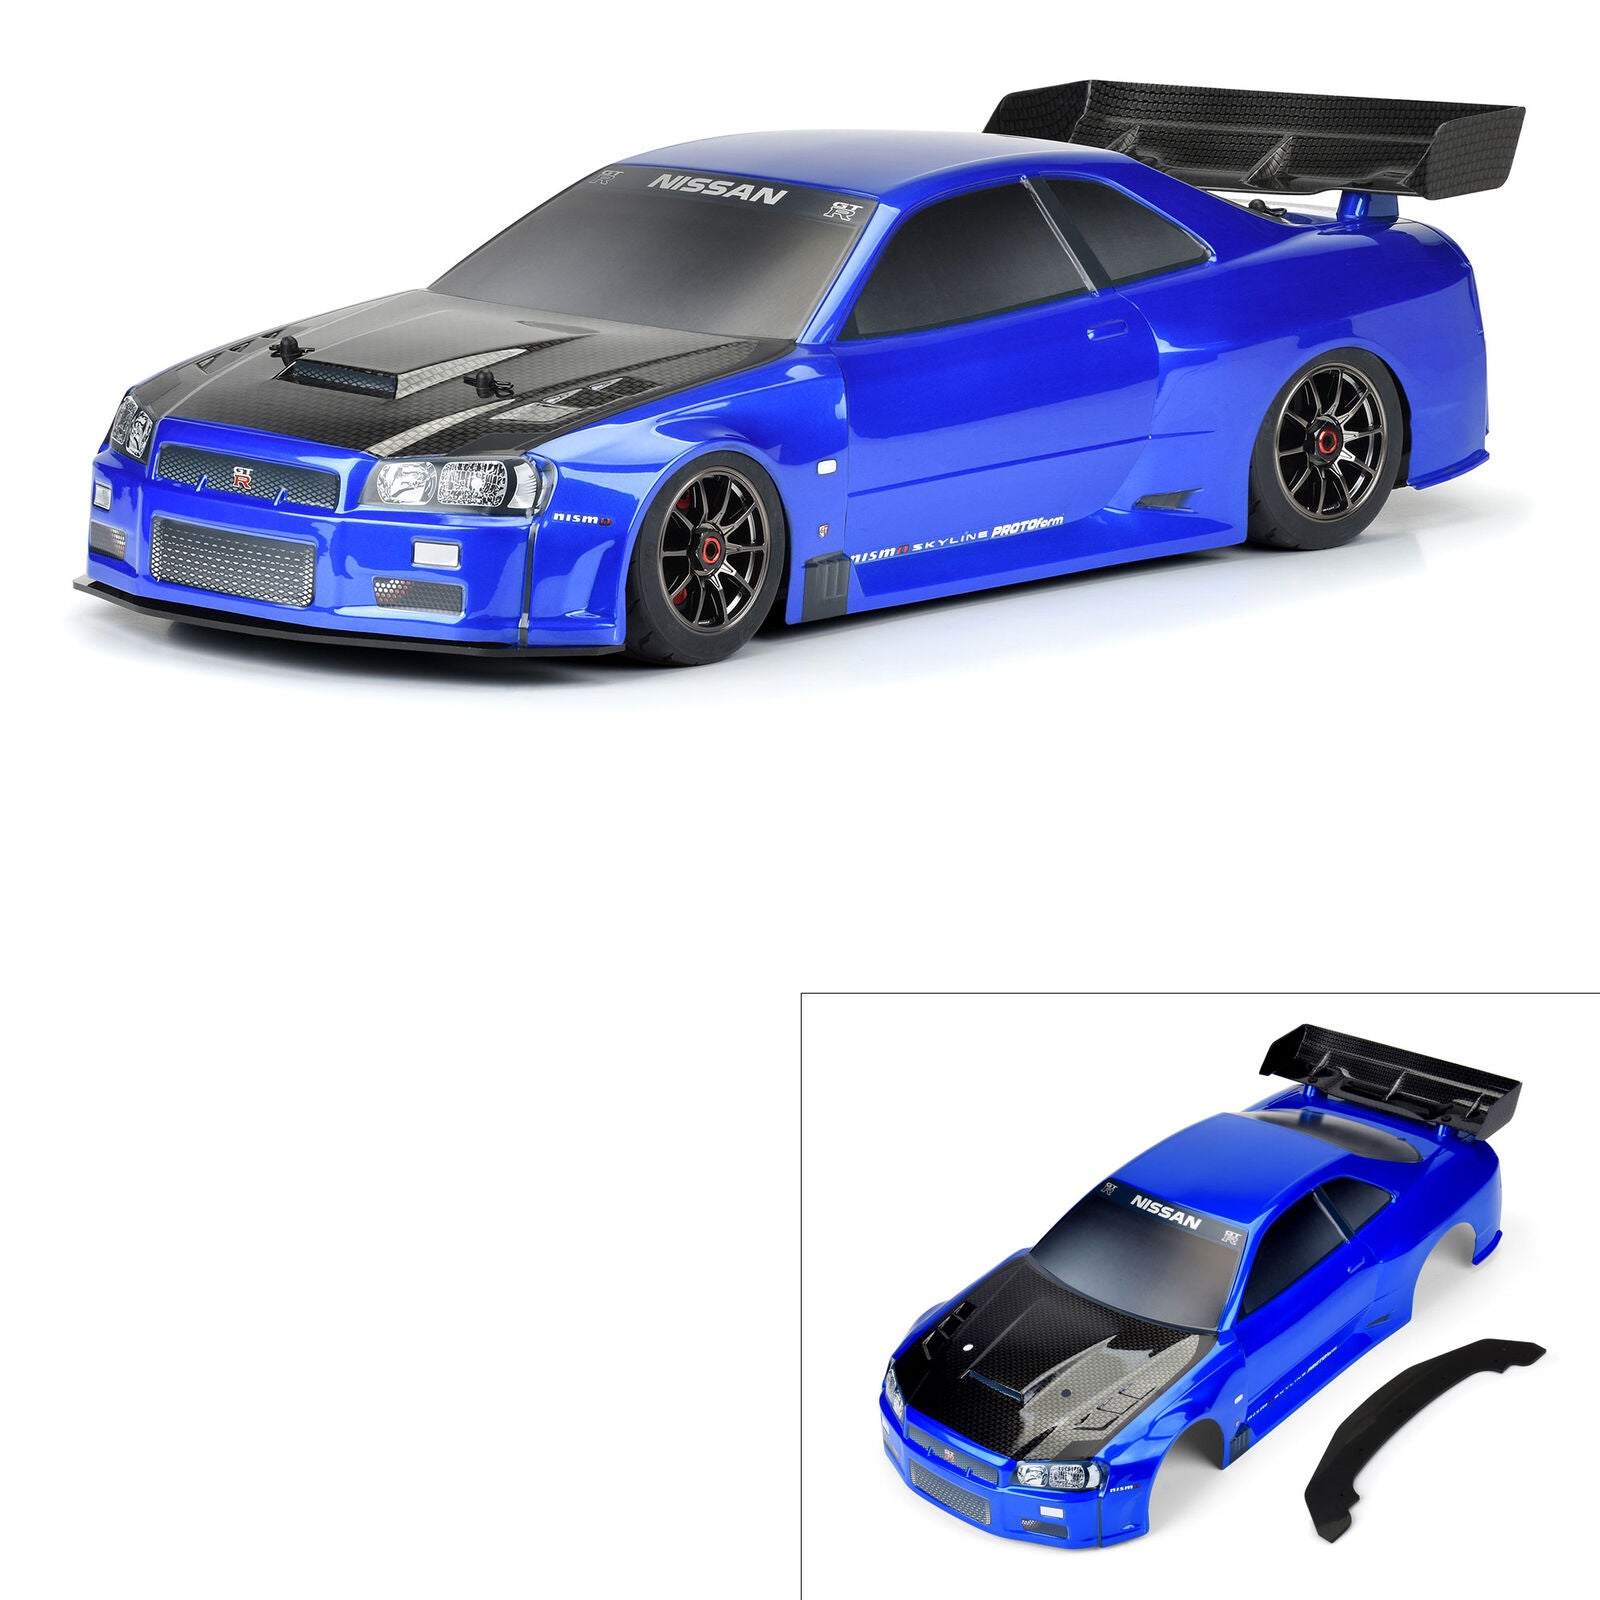 PROTOFORM 1584-13 1/7 2002 Nissan Skyline GT-R R34 Painted Body (Blue): Infraction 6S